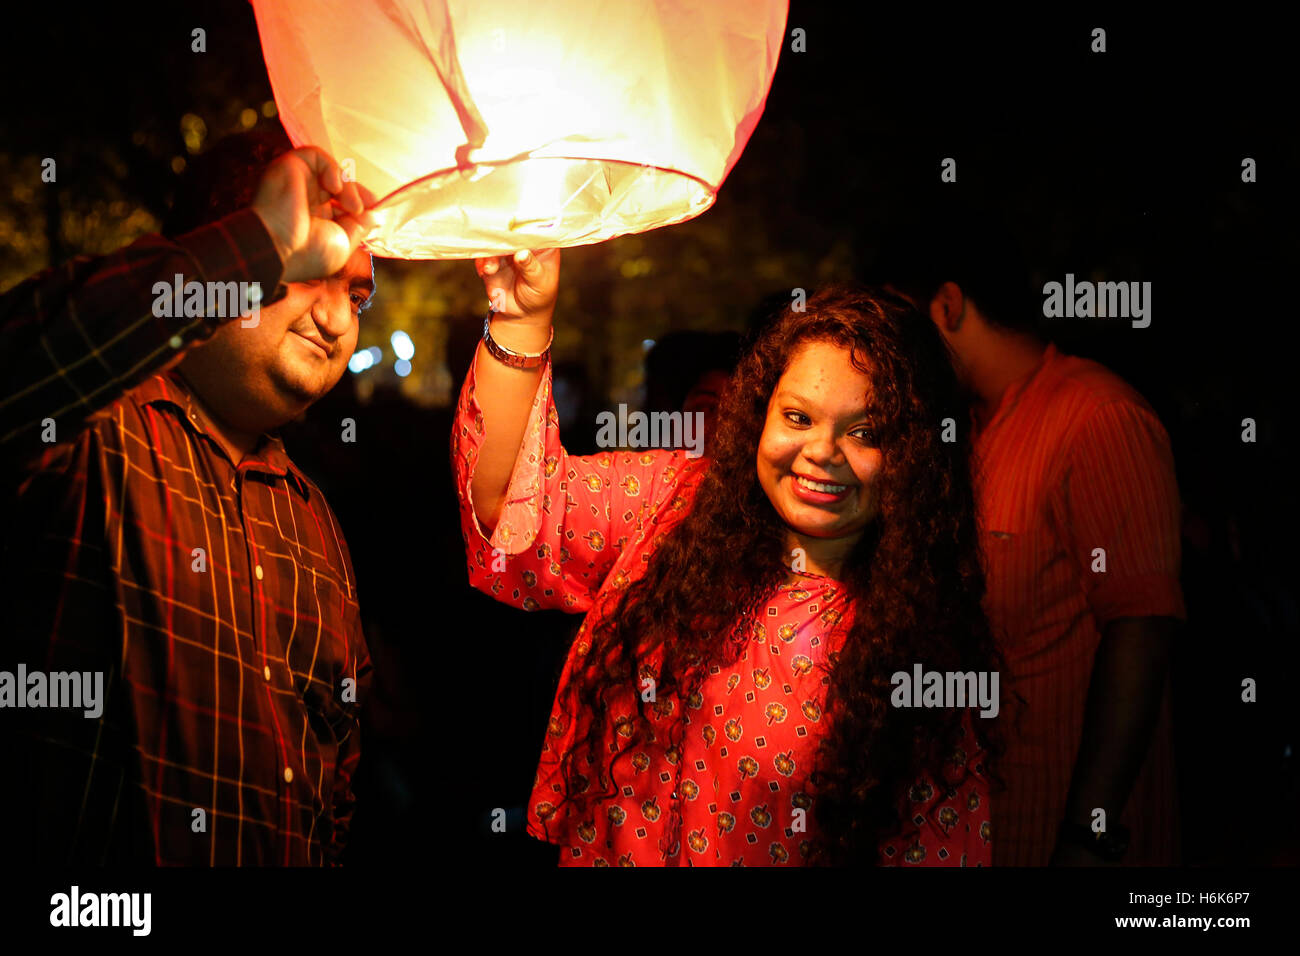 Sky Lantern Lighting by a Pair of Hands Holding the Paper Hot Air Balloon  in a Black Background Stock Image - Image of lamp, fire: 150374387